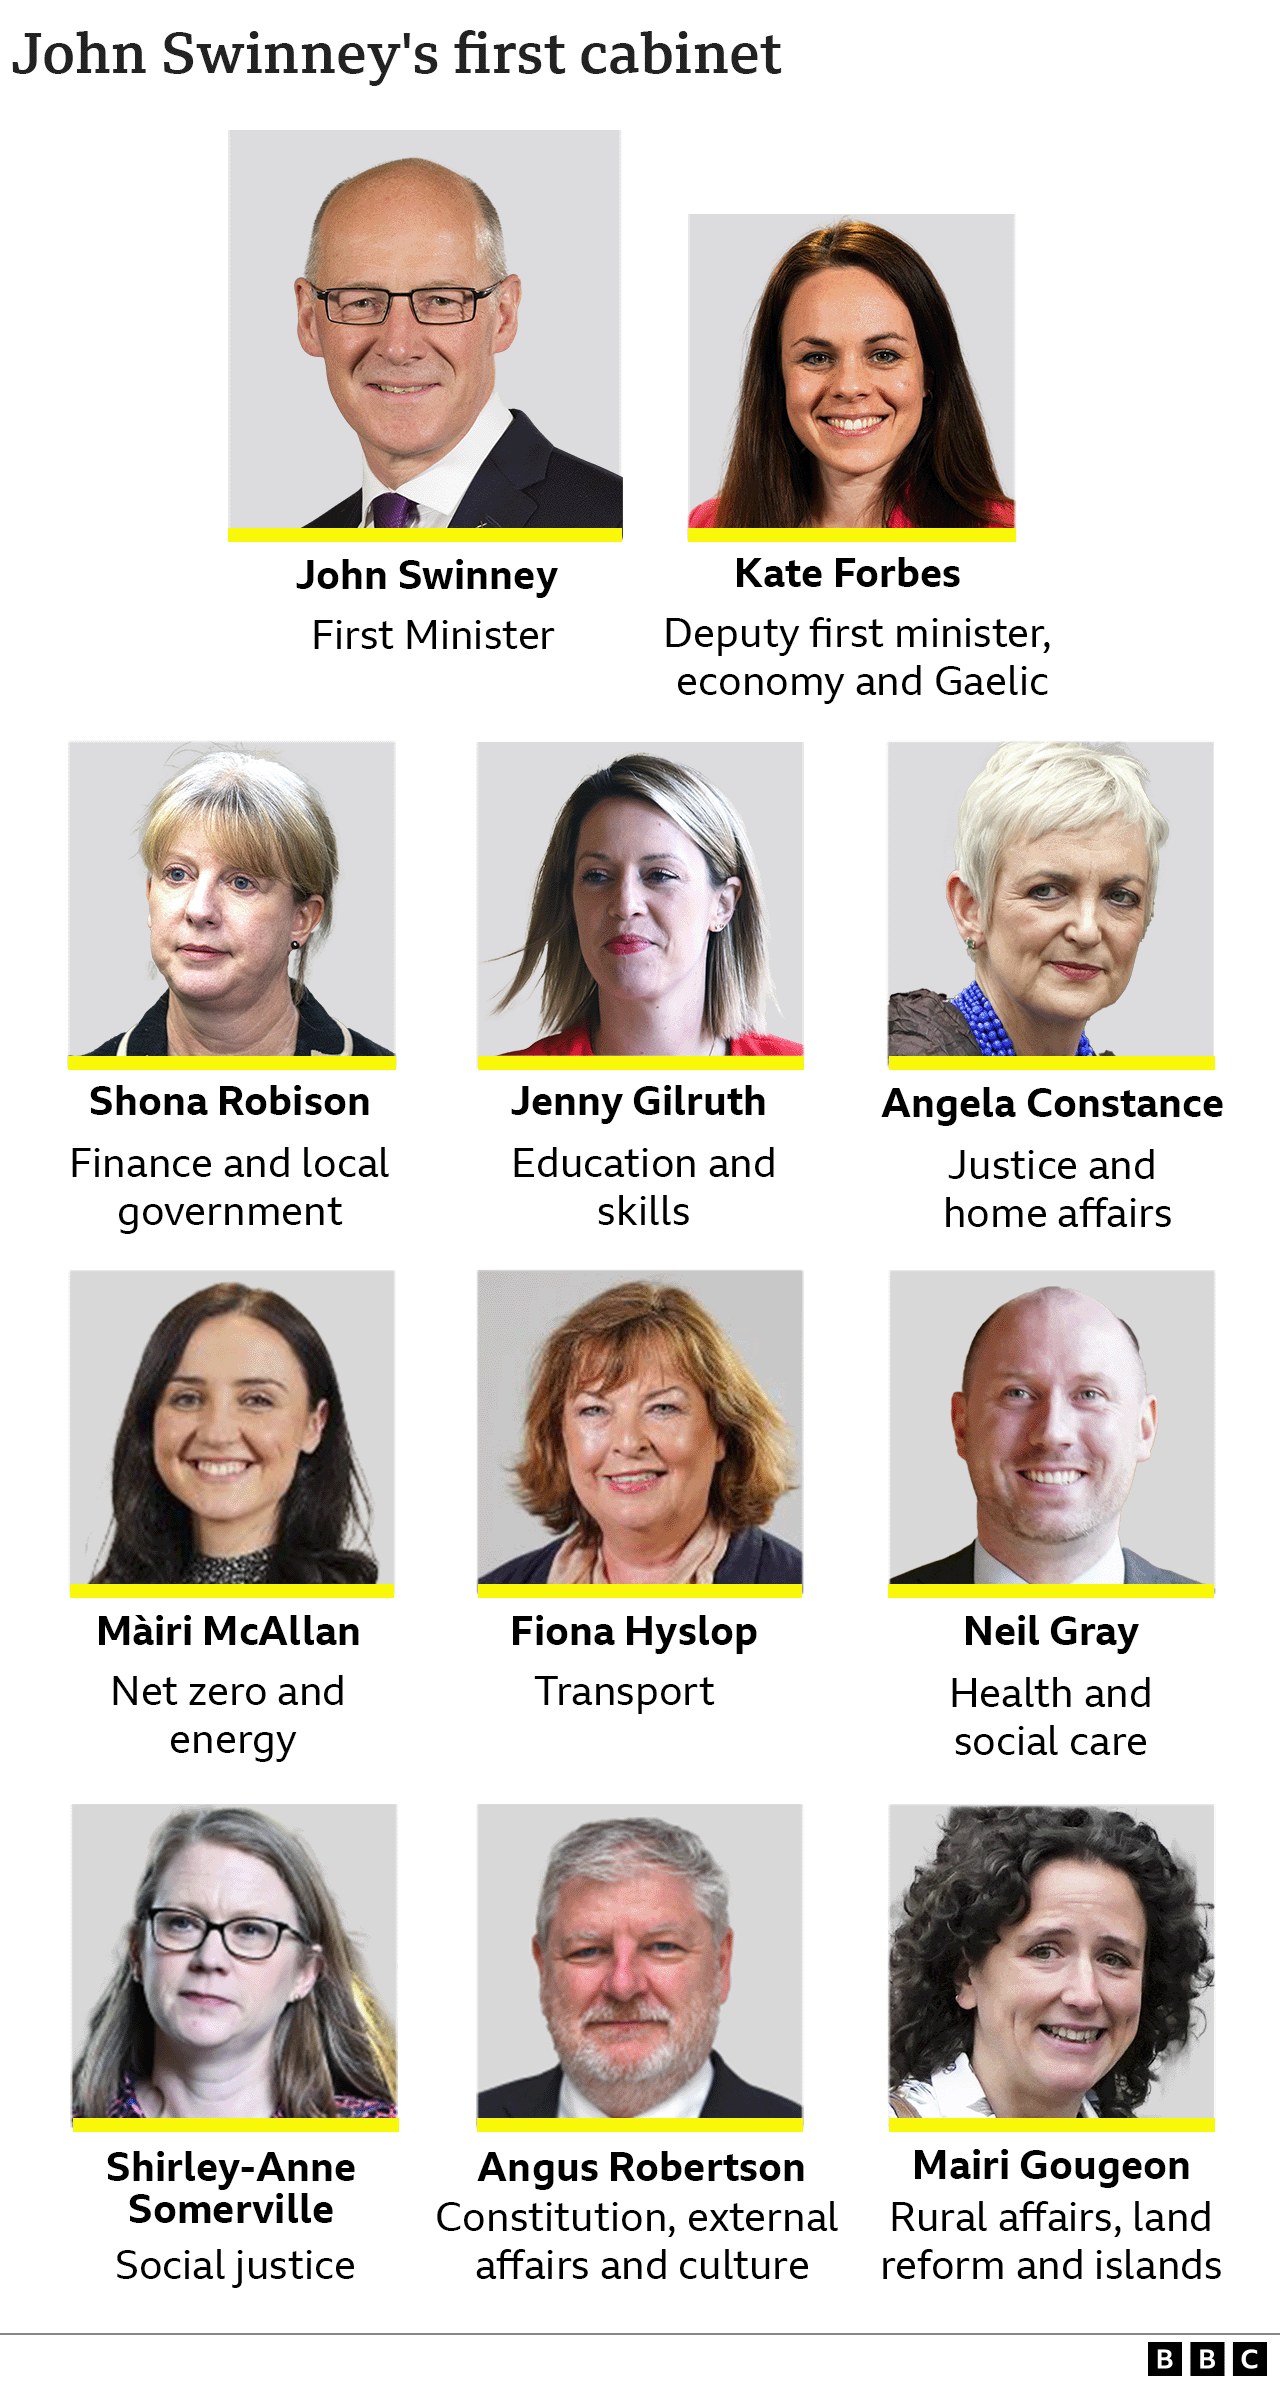 Graphic showing John Swinney's first cabinet: with John Swinney, first minister; Kate Forbes, deputy first minister, economy and Gaelic secretary; Shona Robison, finance and local government secretary; Jenny Gilruth, education and skills secretary; Angela Constance, justice and home affairs secretary; Måiri McAllan, net zero and energy secretary; Fiona Hyslop, transport secretary; Neil Gray, health and social care secretary; Shirley-Anne Somerville, social justice secretary; Angus Robertson, constitution, external affairs and culture secretary; and Mairi Gougeon, rural affairs, land reform and islands secretary